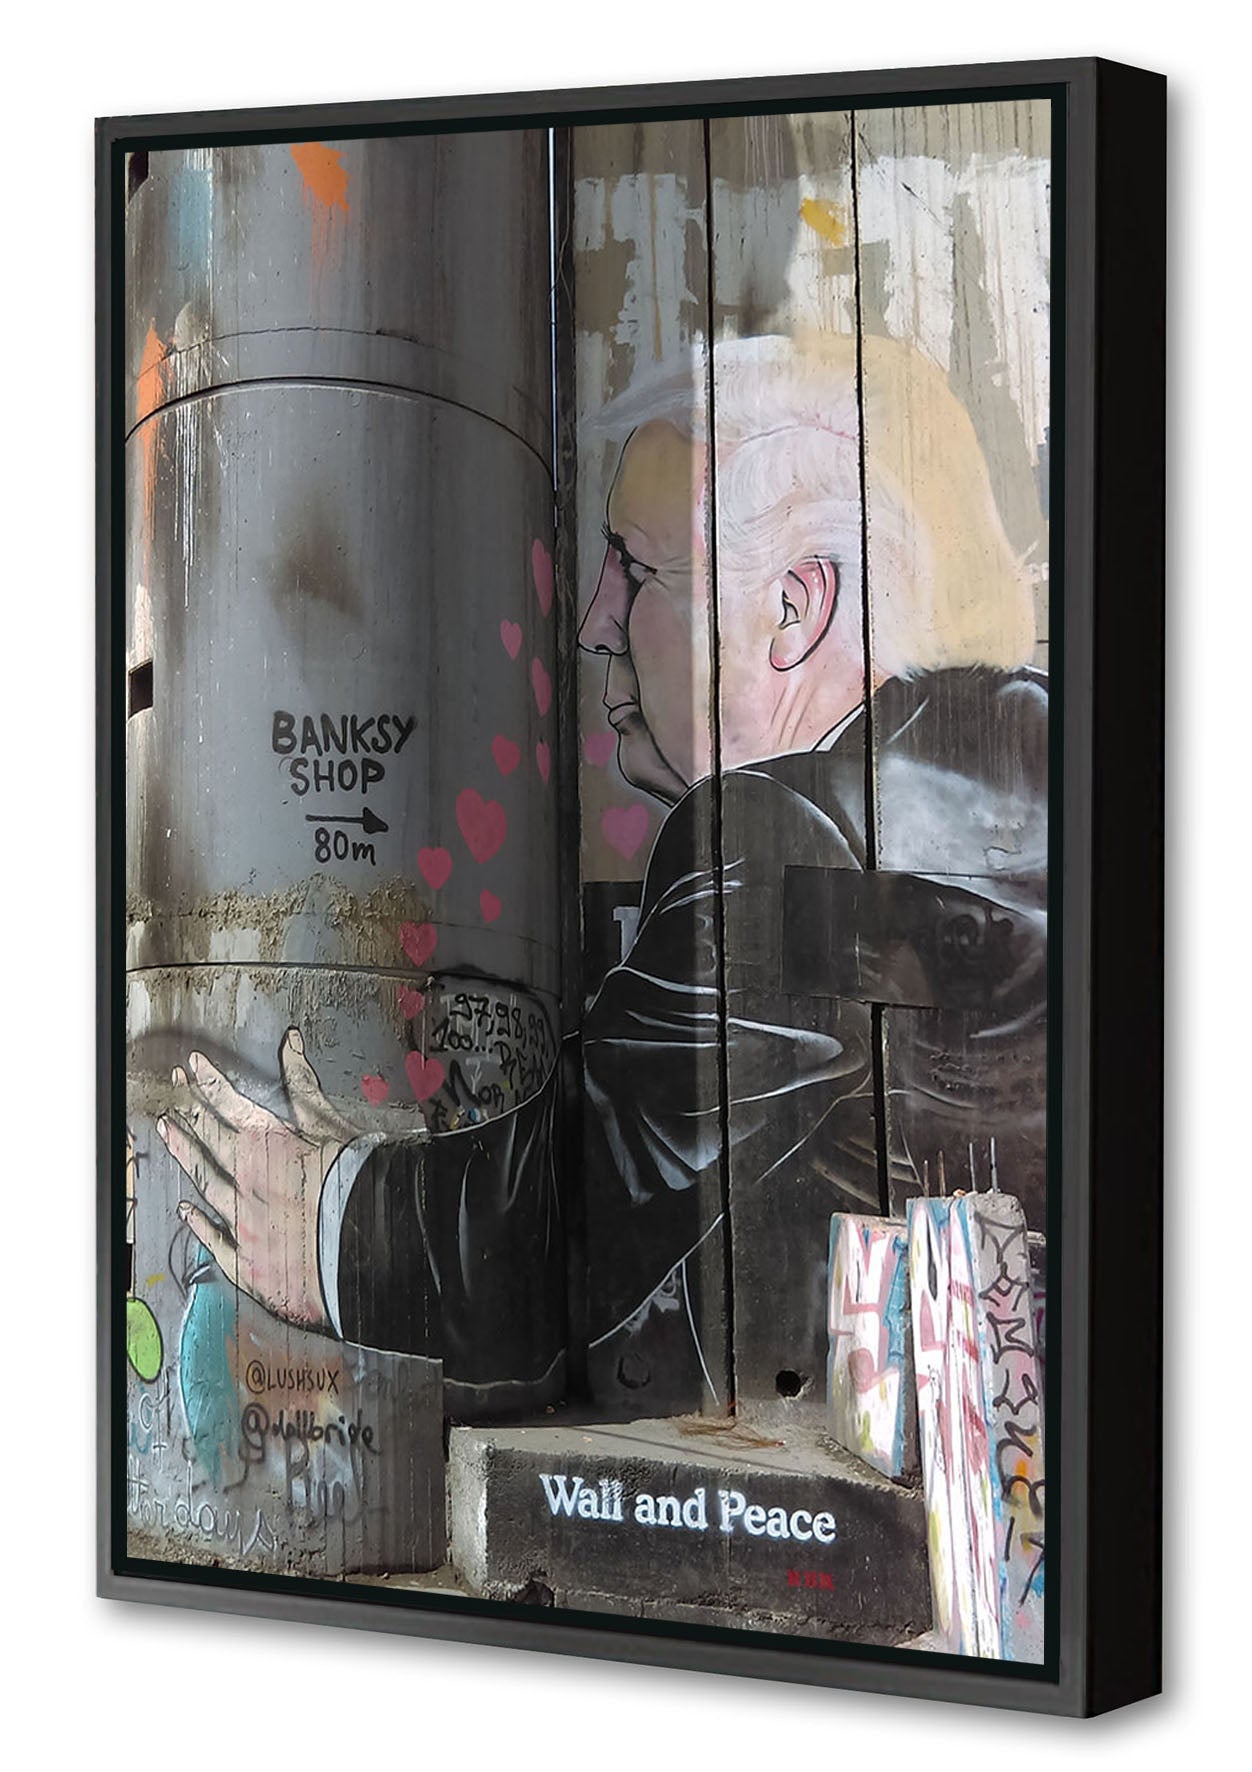 Wall and Peace-banksy, print-Canvas Print with Box Frame-40 x 60 cm-BLUE SHAKER